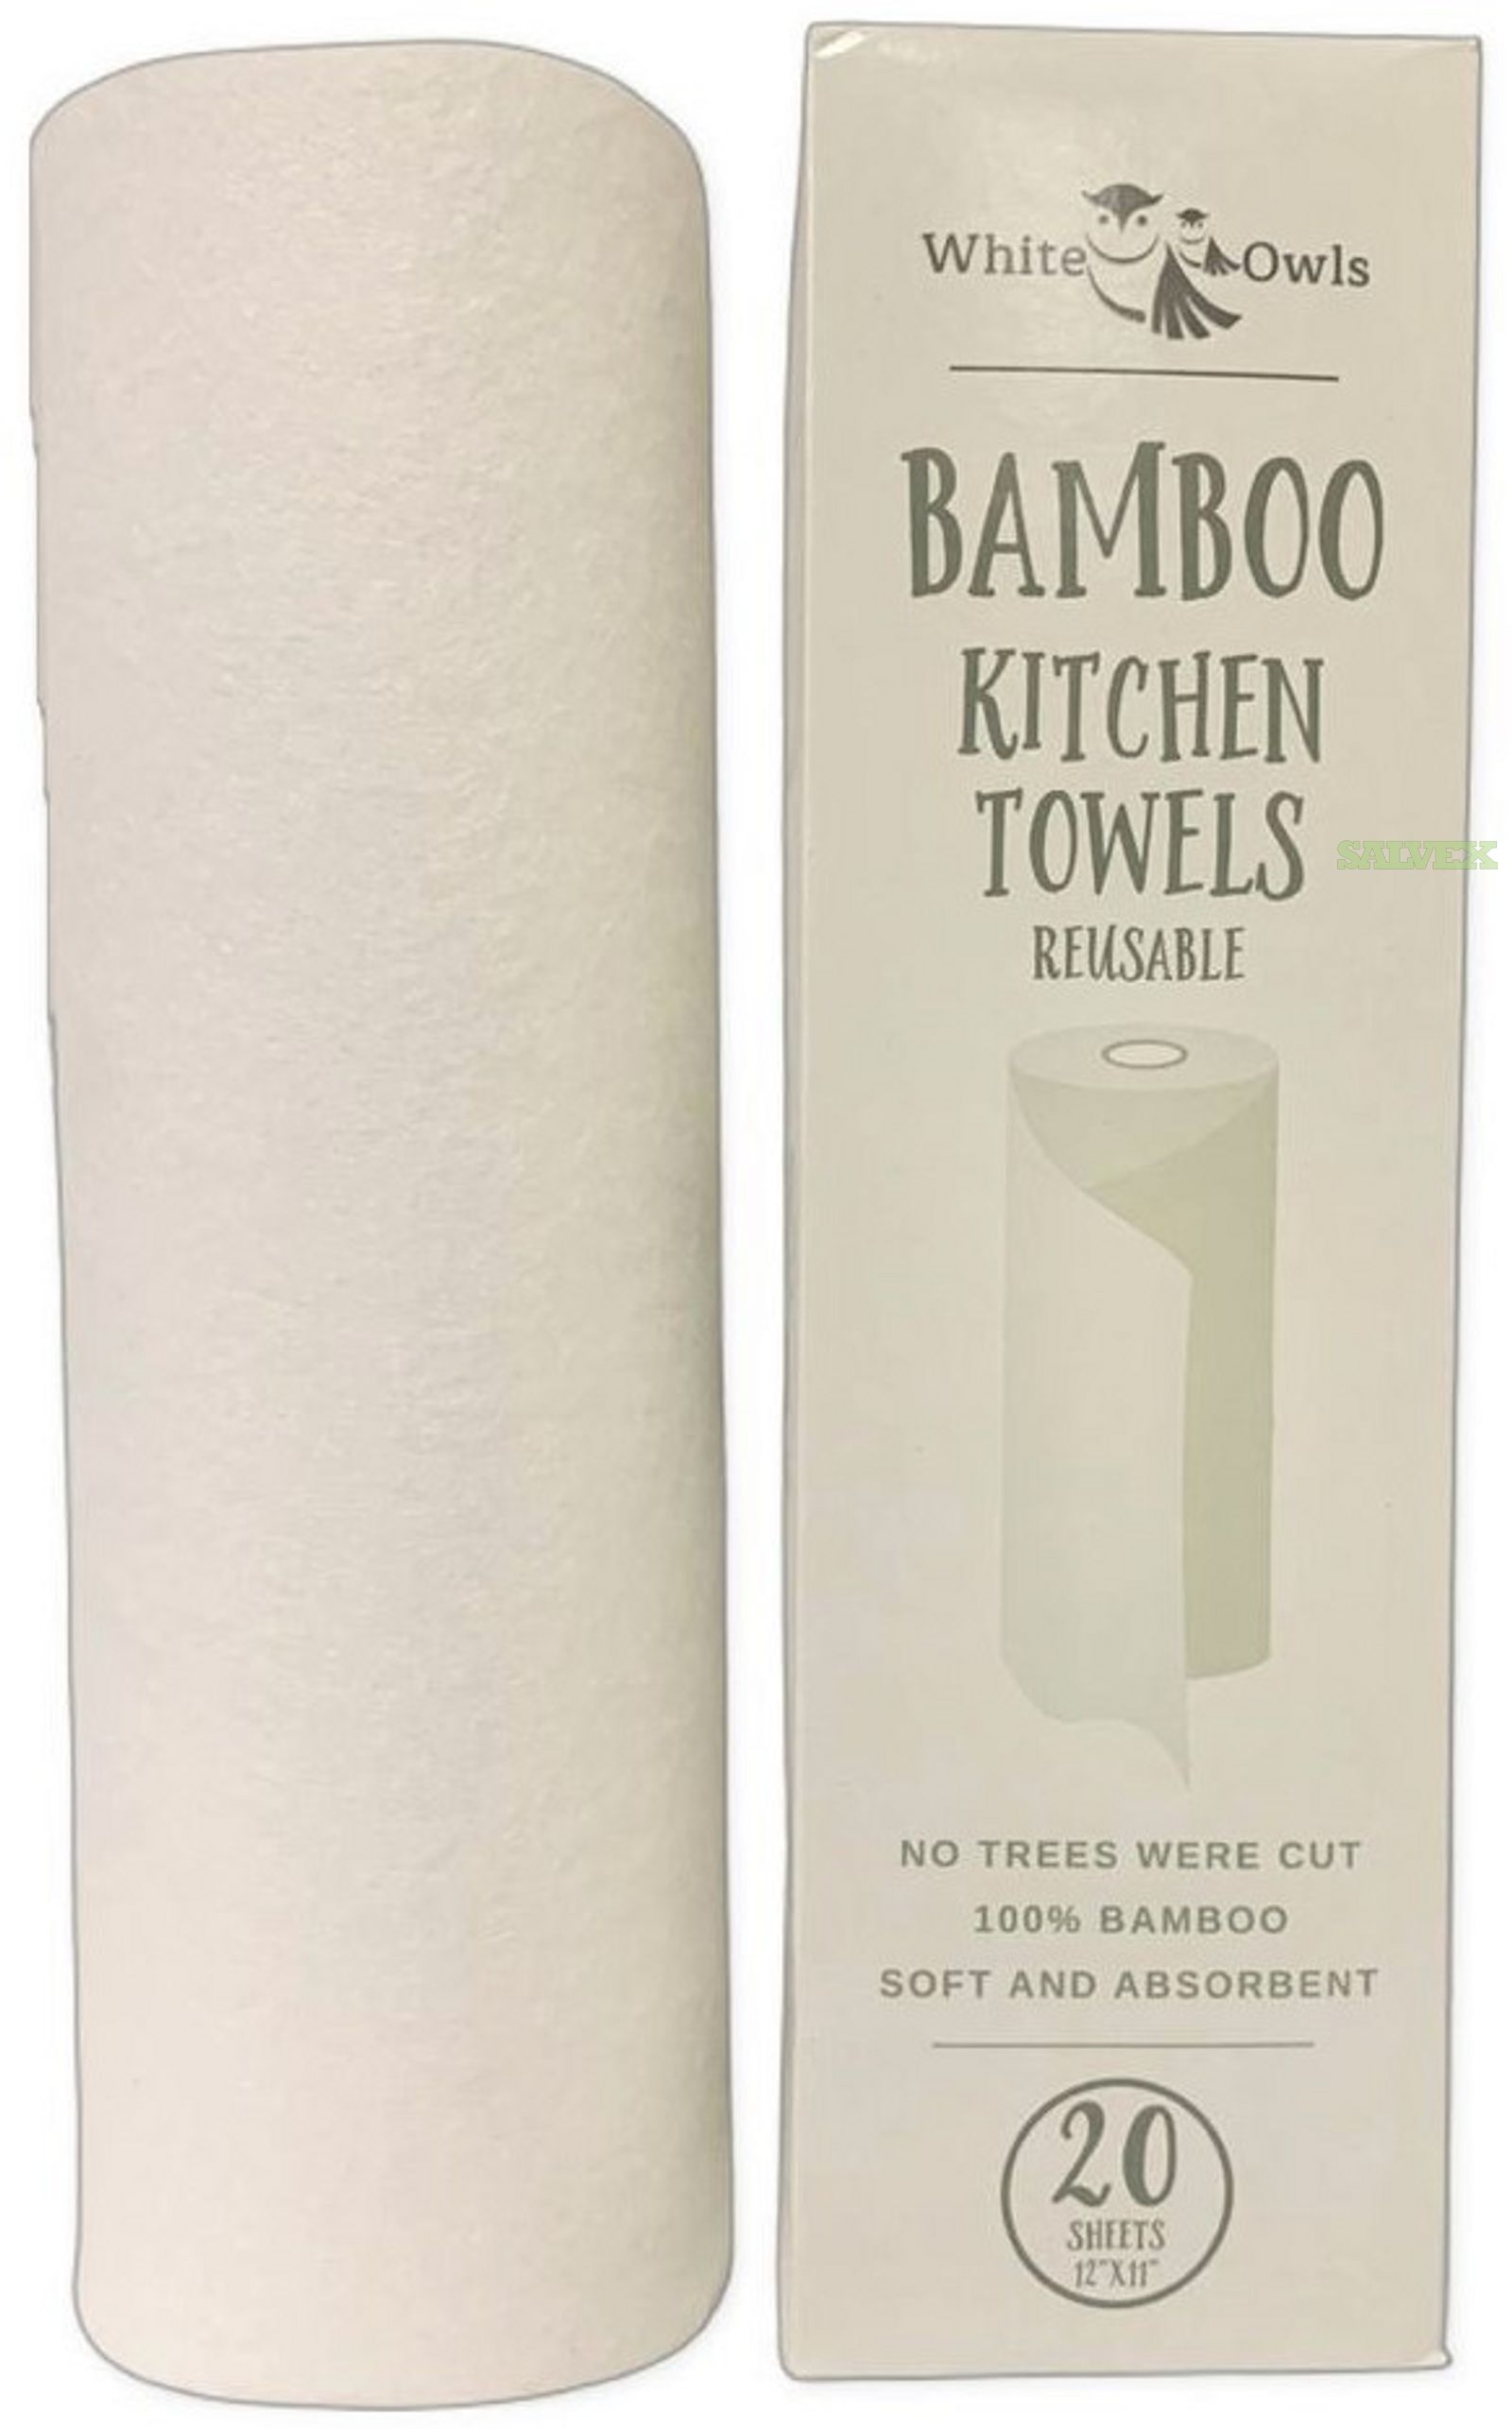 Reusable Bamboo Kitchen Towels (278 Cases) - Retail Ready